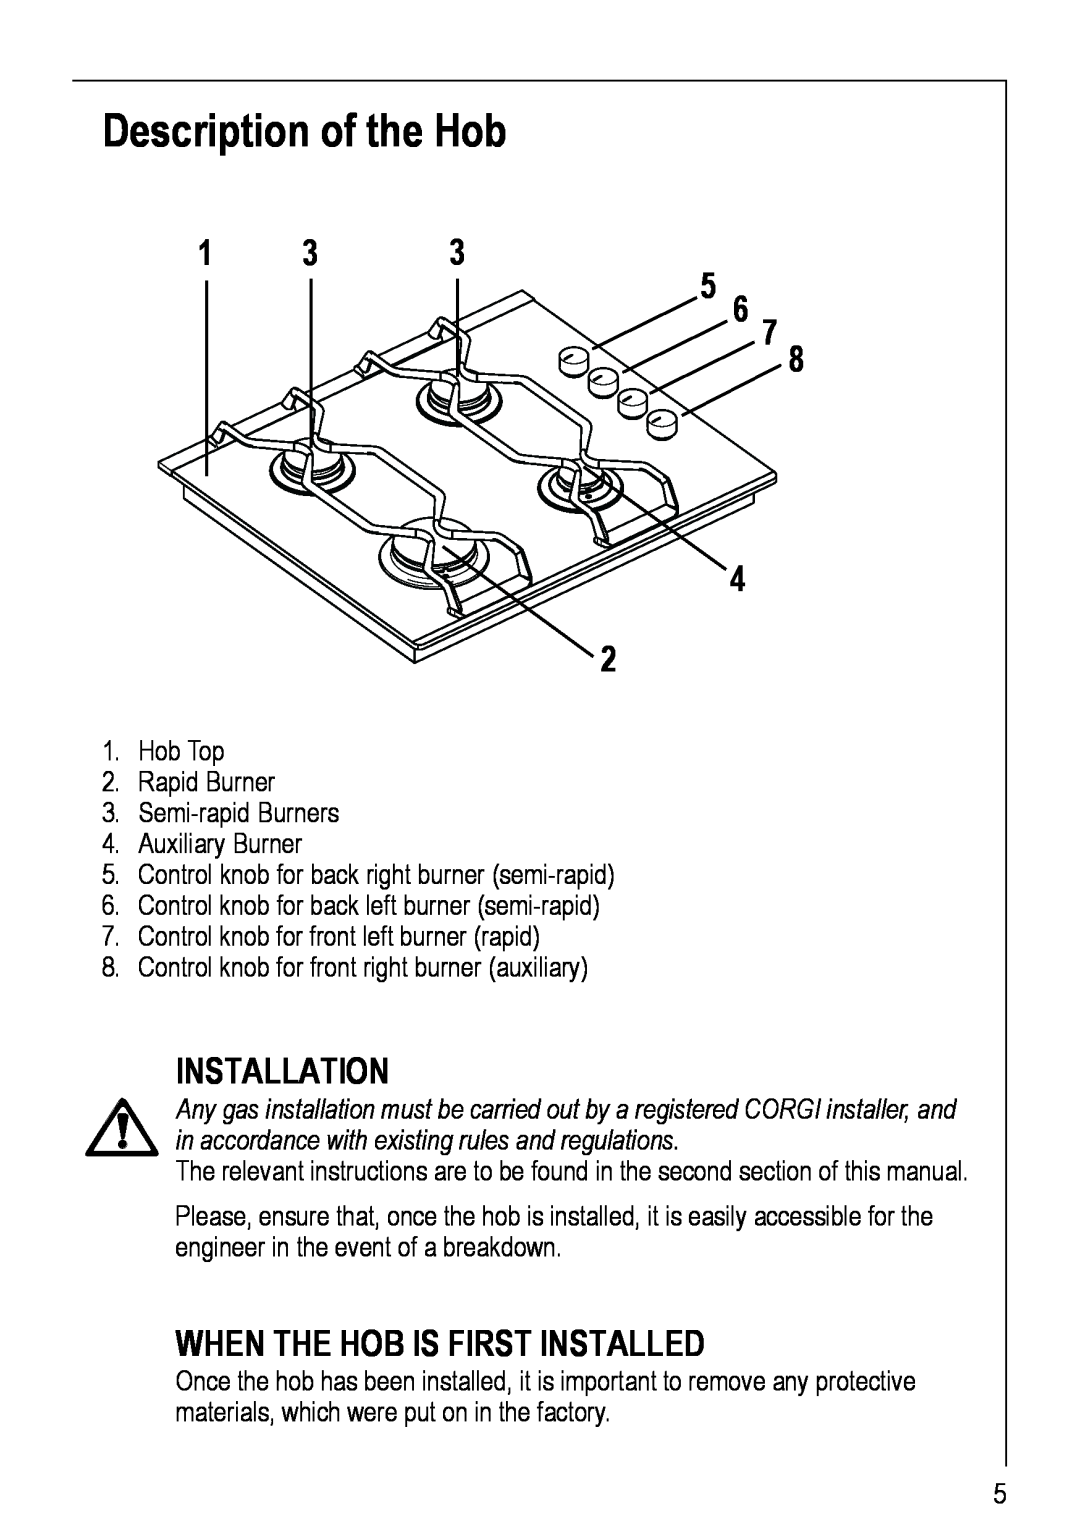 Electrolux 69802 G manual Description of the Hob, 5 6, Installation, When The Hob Is First Installed 